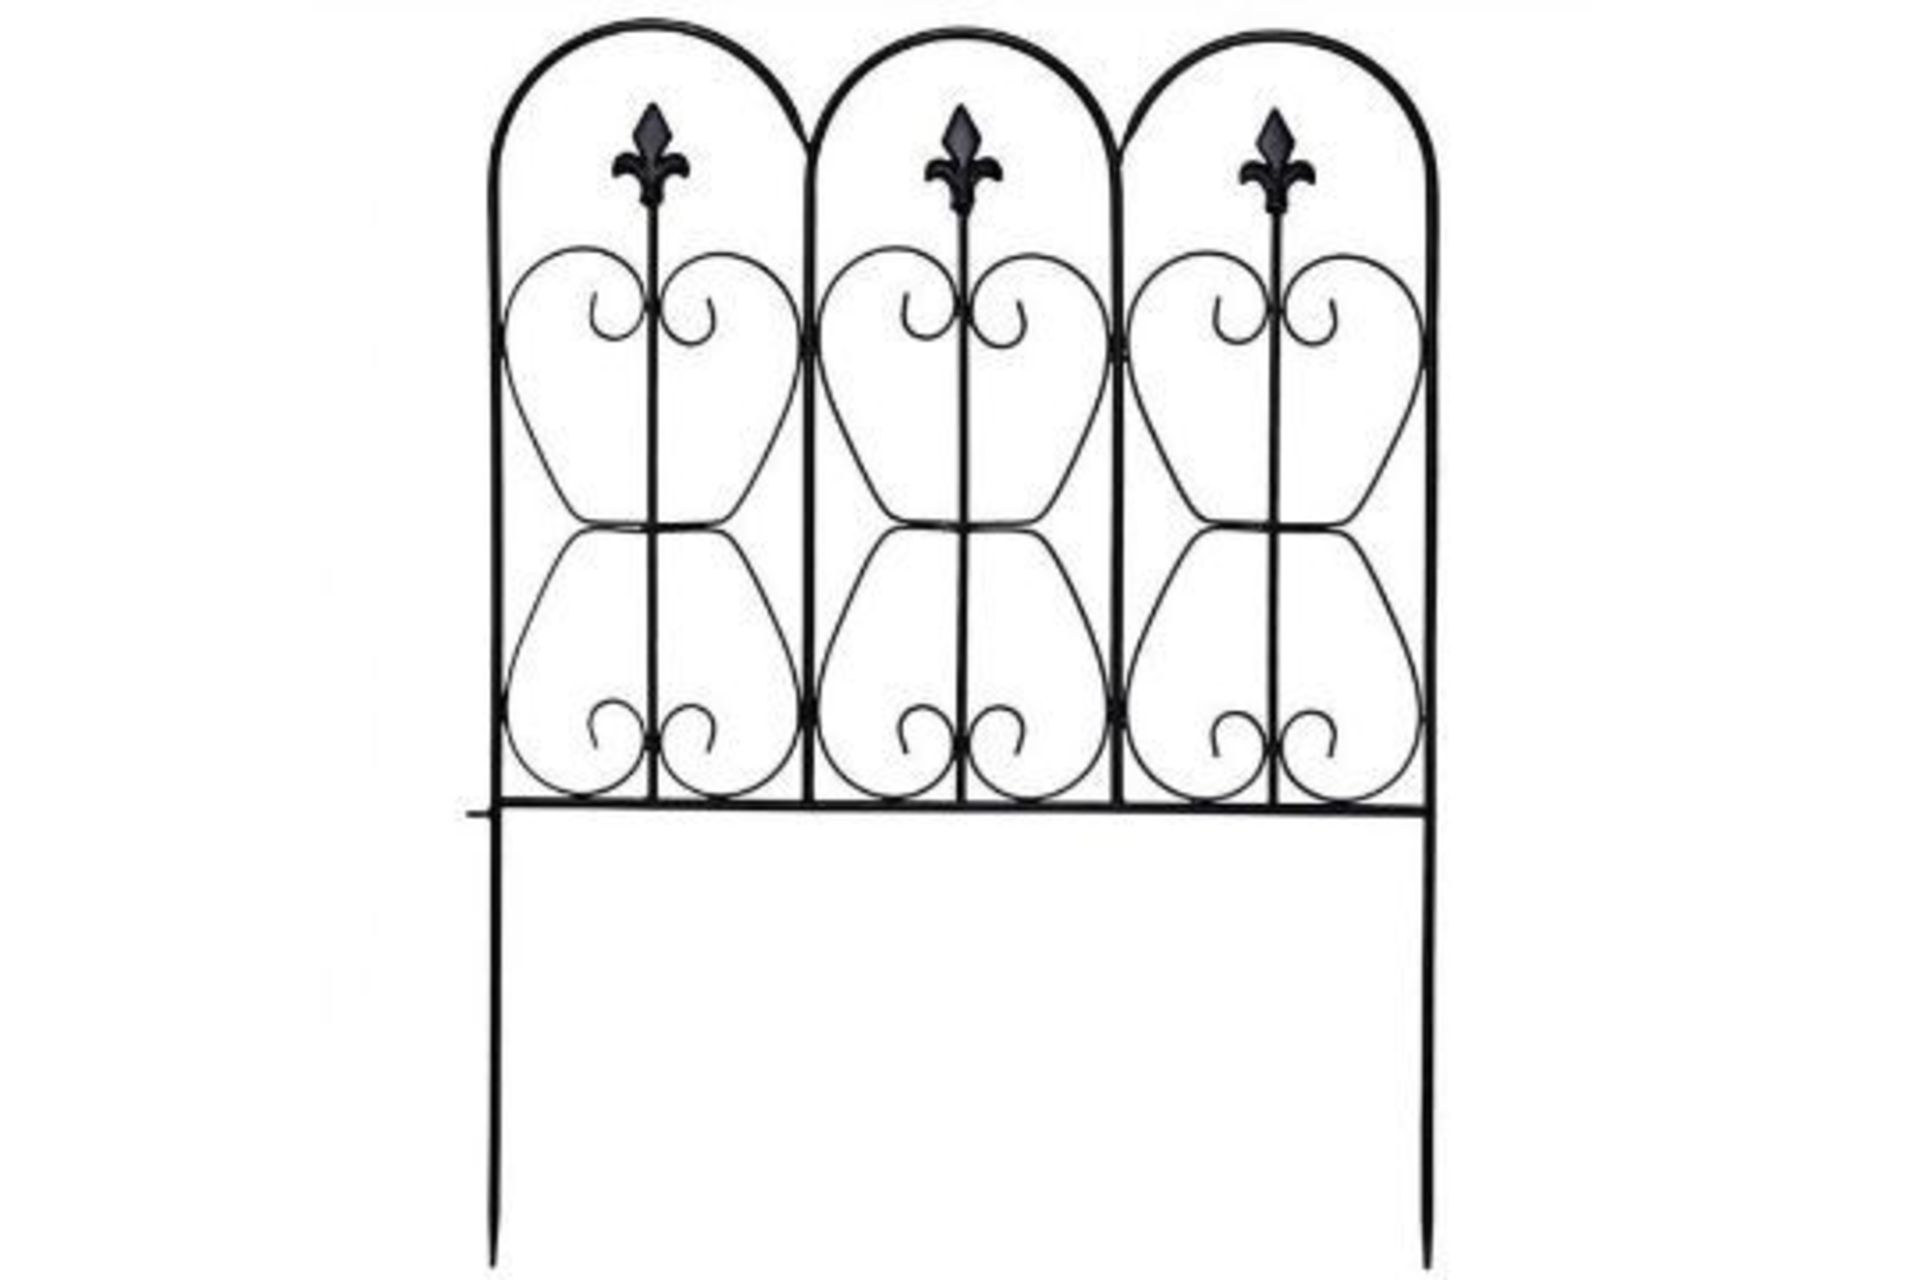 Garden Fencing Panels for Decoration with Arched and Inter-lockable Design. - R14.3